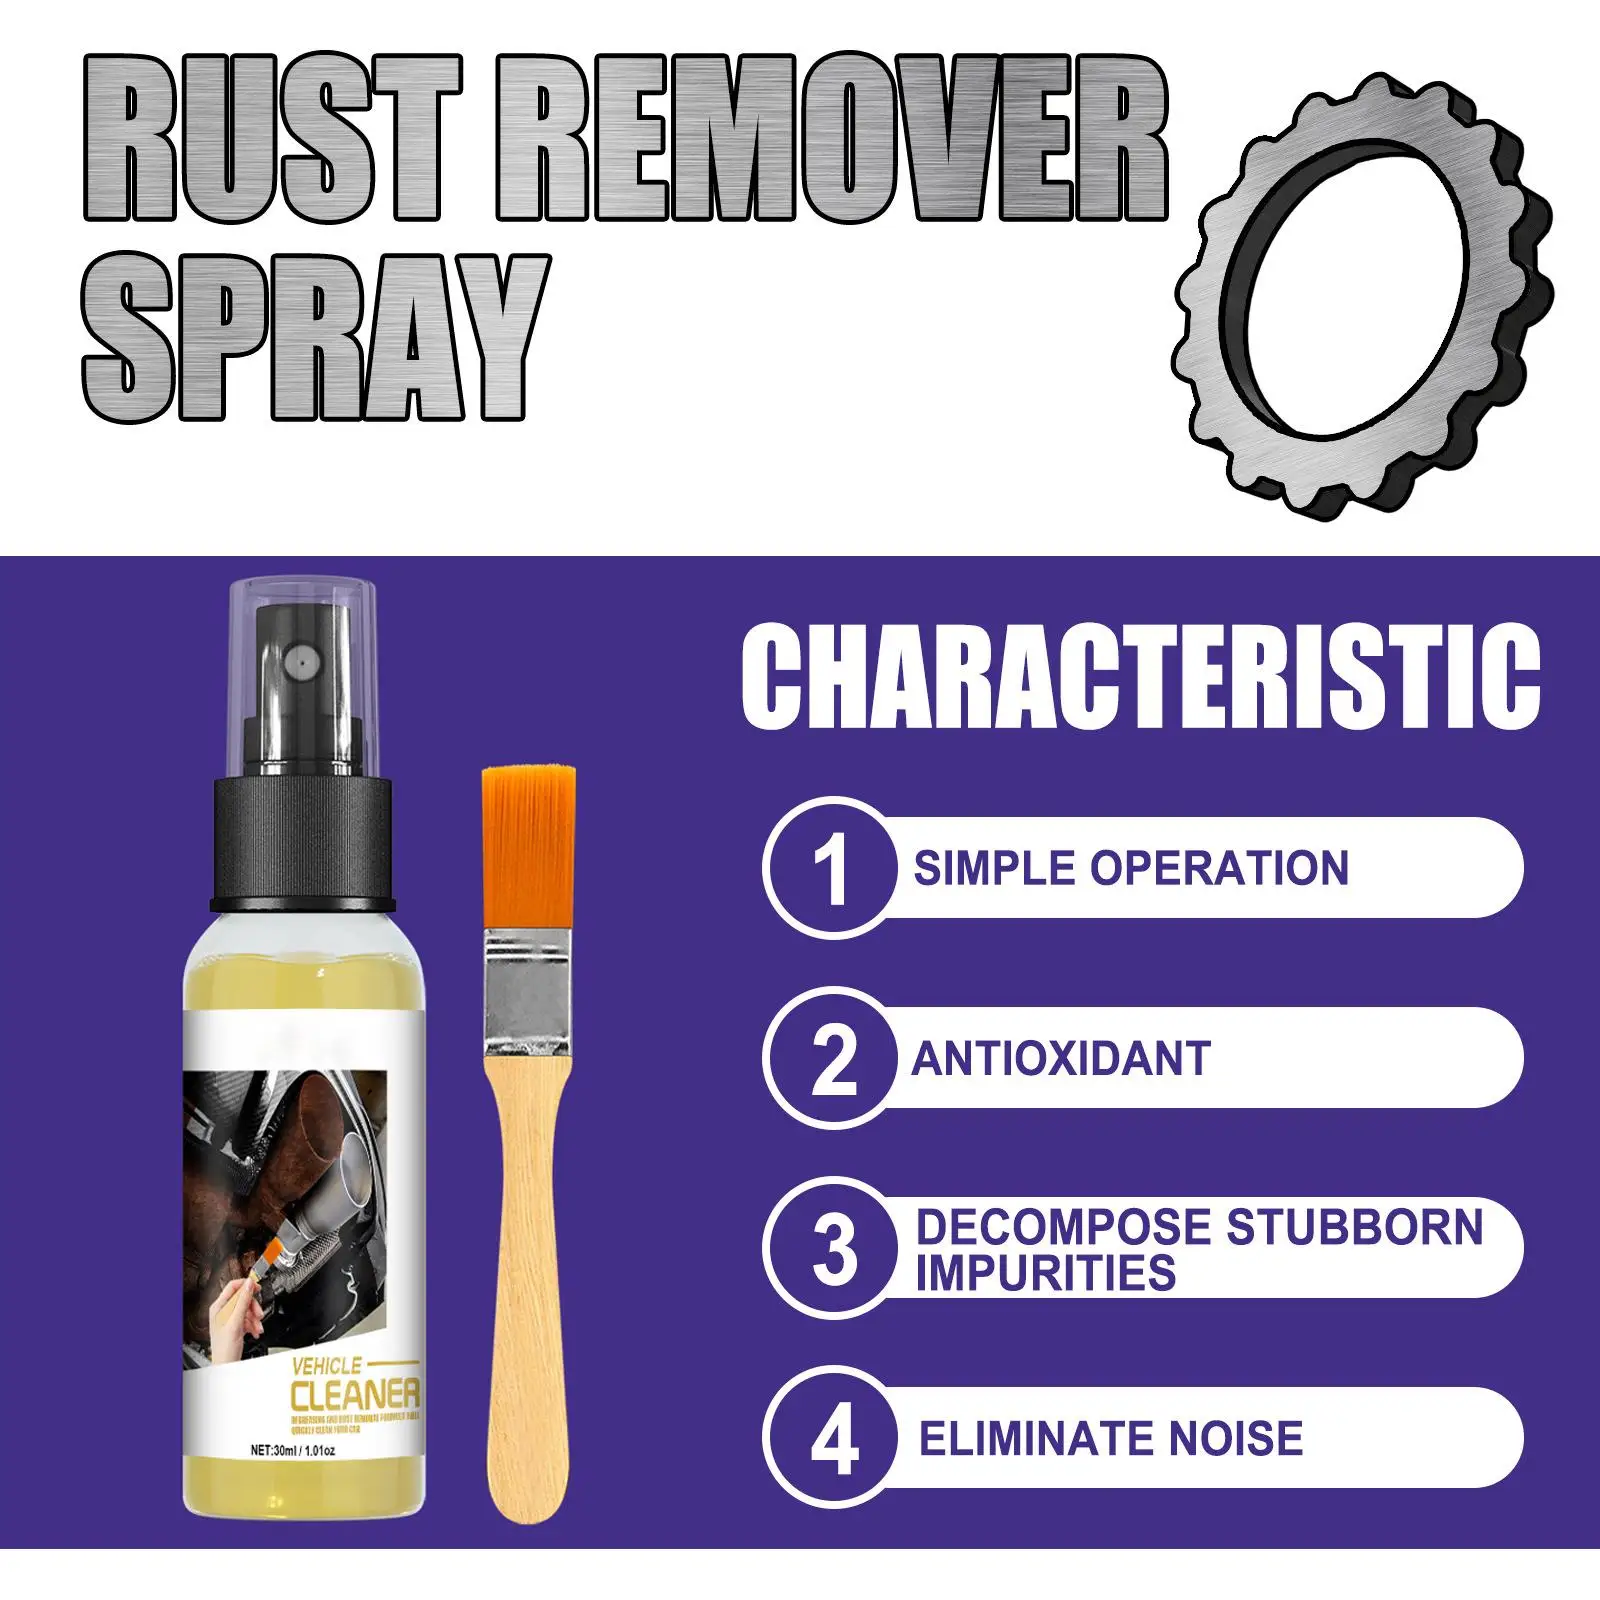 Car Rust Remover Maintenance Tool for Oven Grills Motorcycle bike Parts Boat